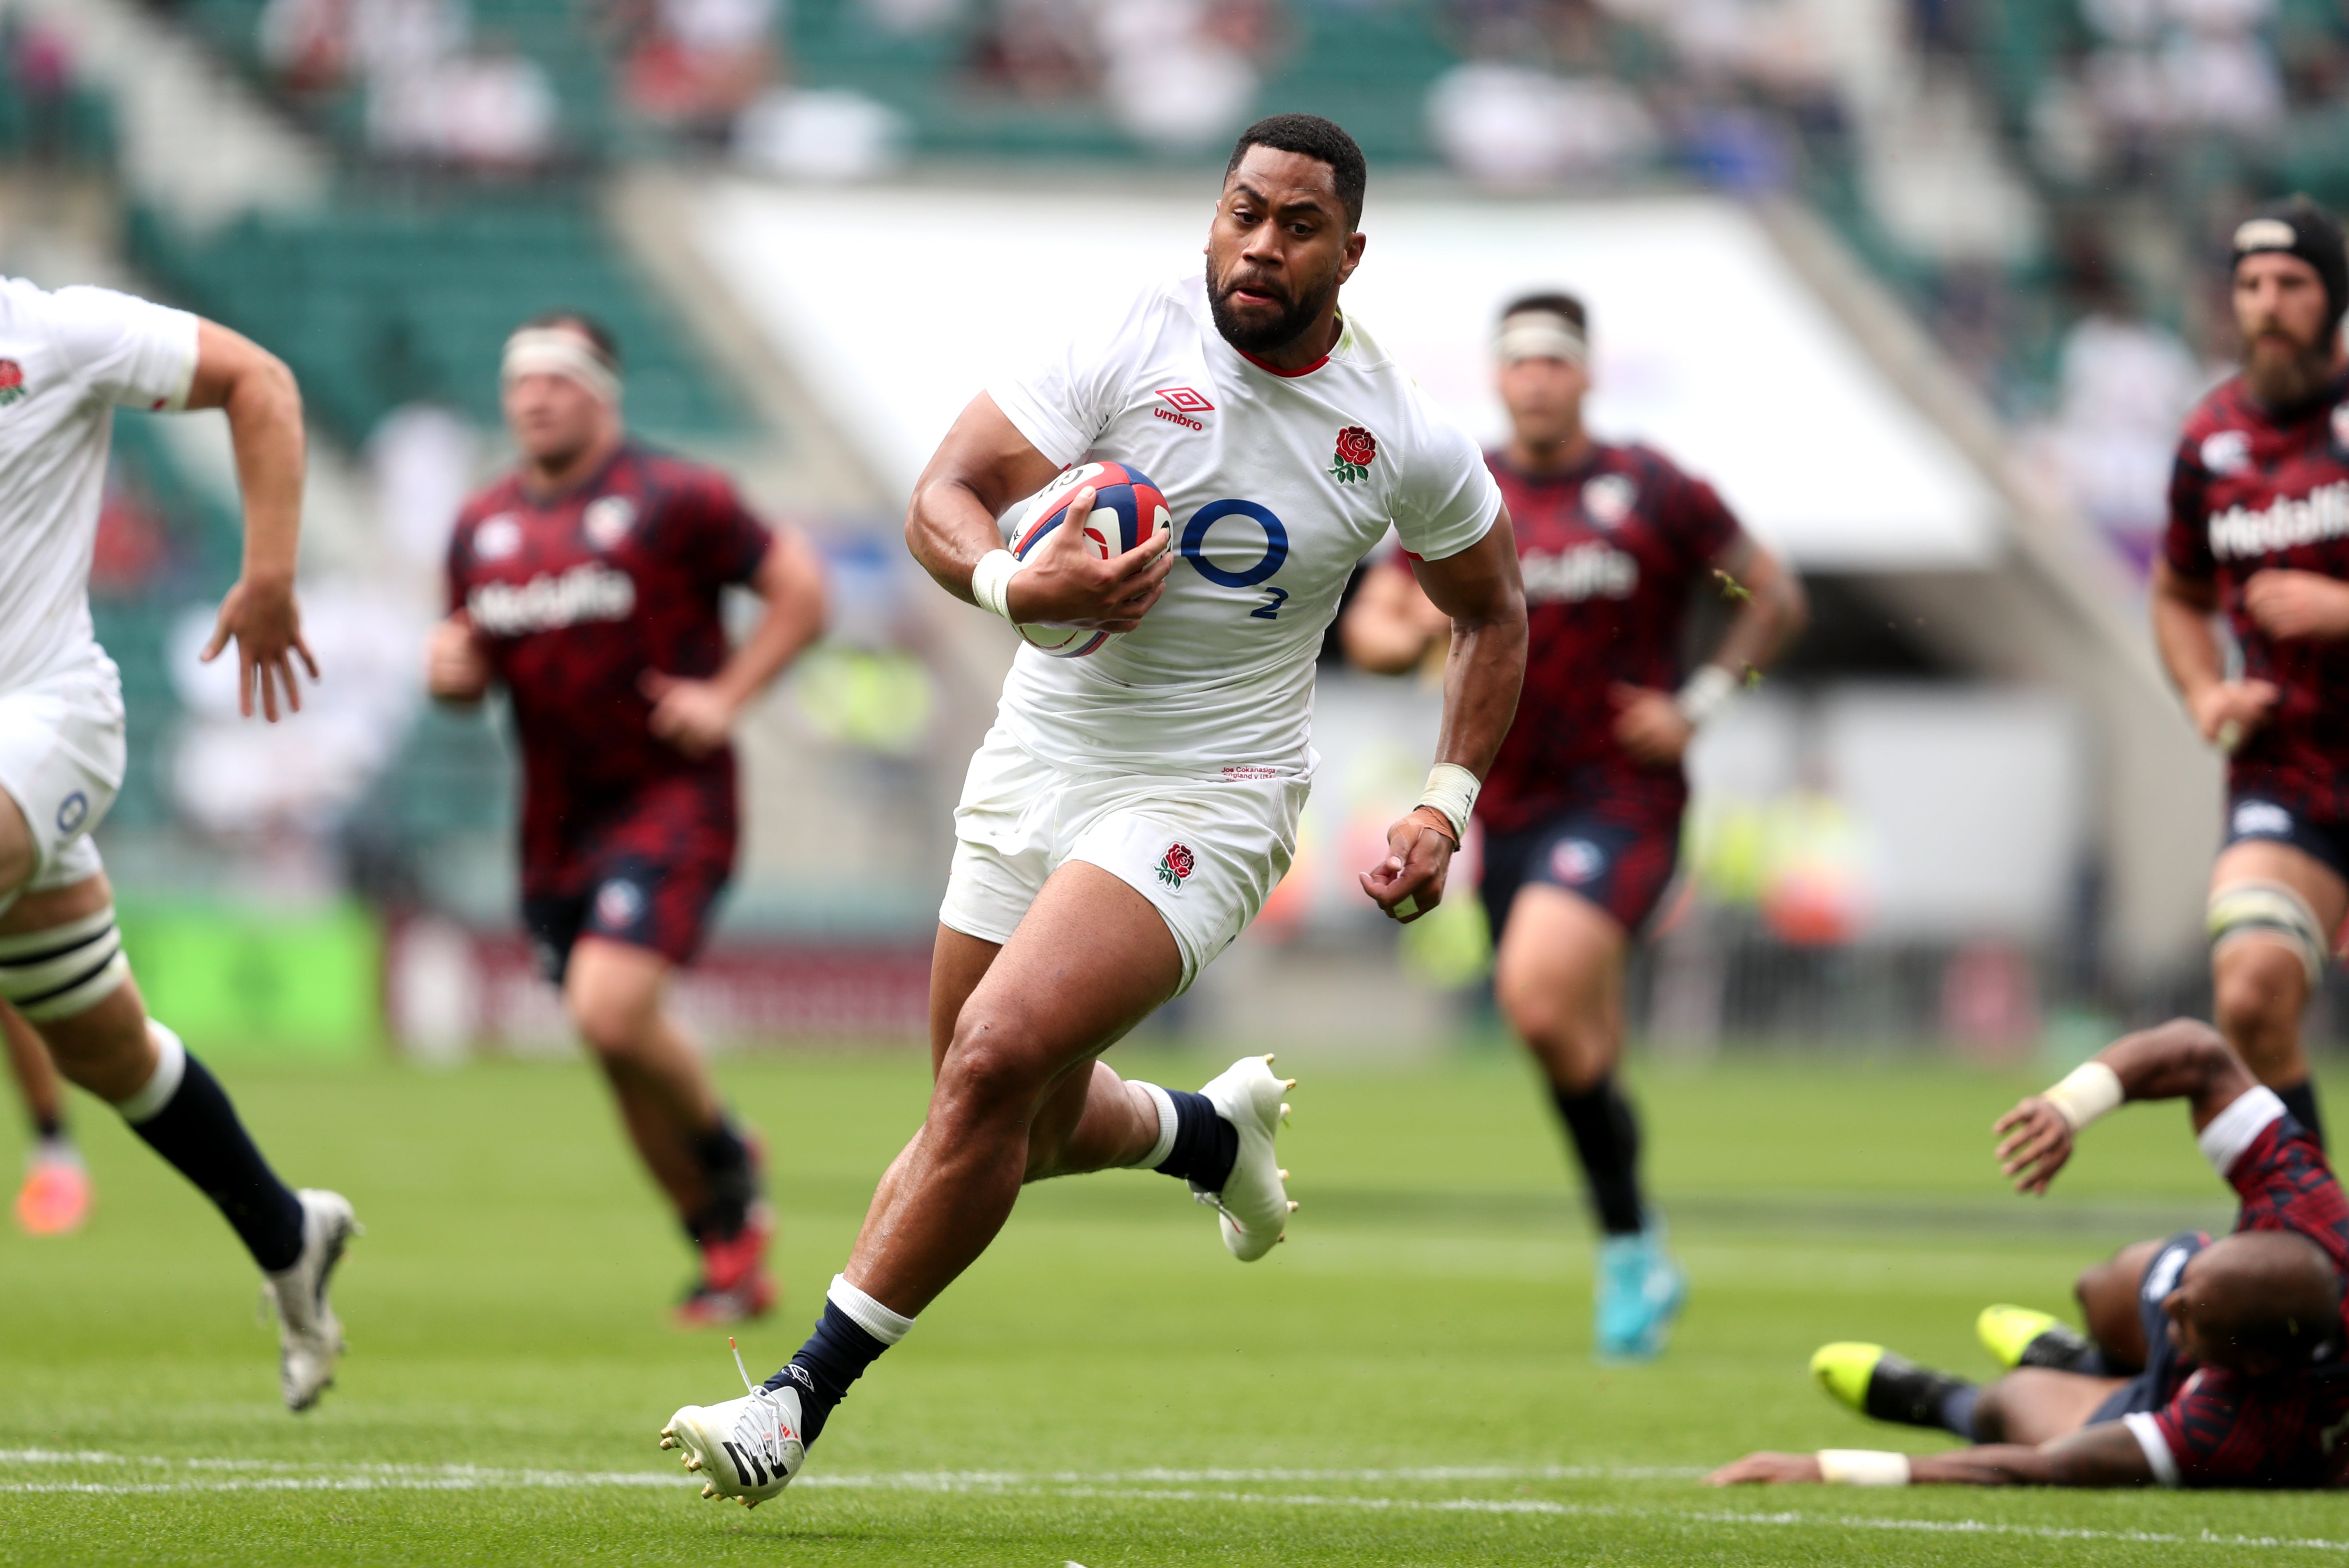 The Bath wing scored two tries on his return to England duty at Twickenham on Sunday